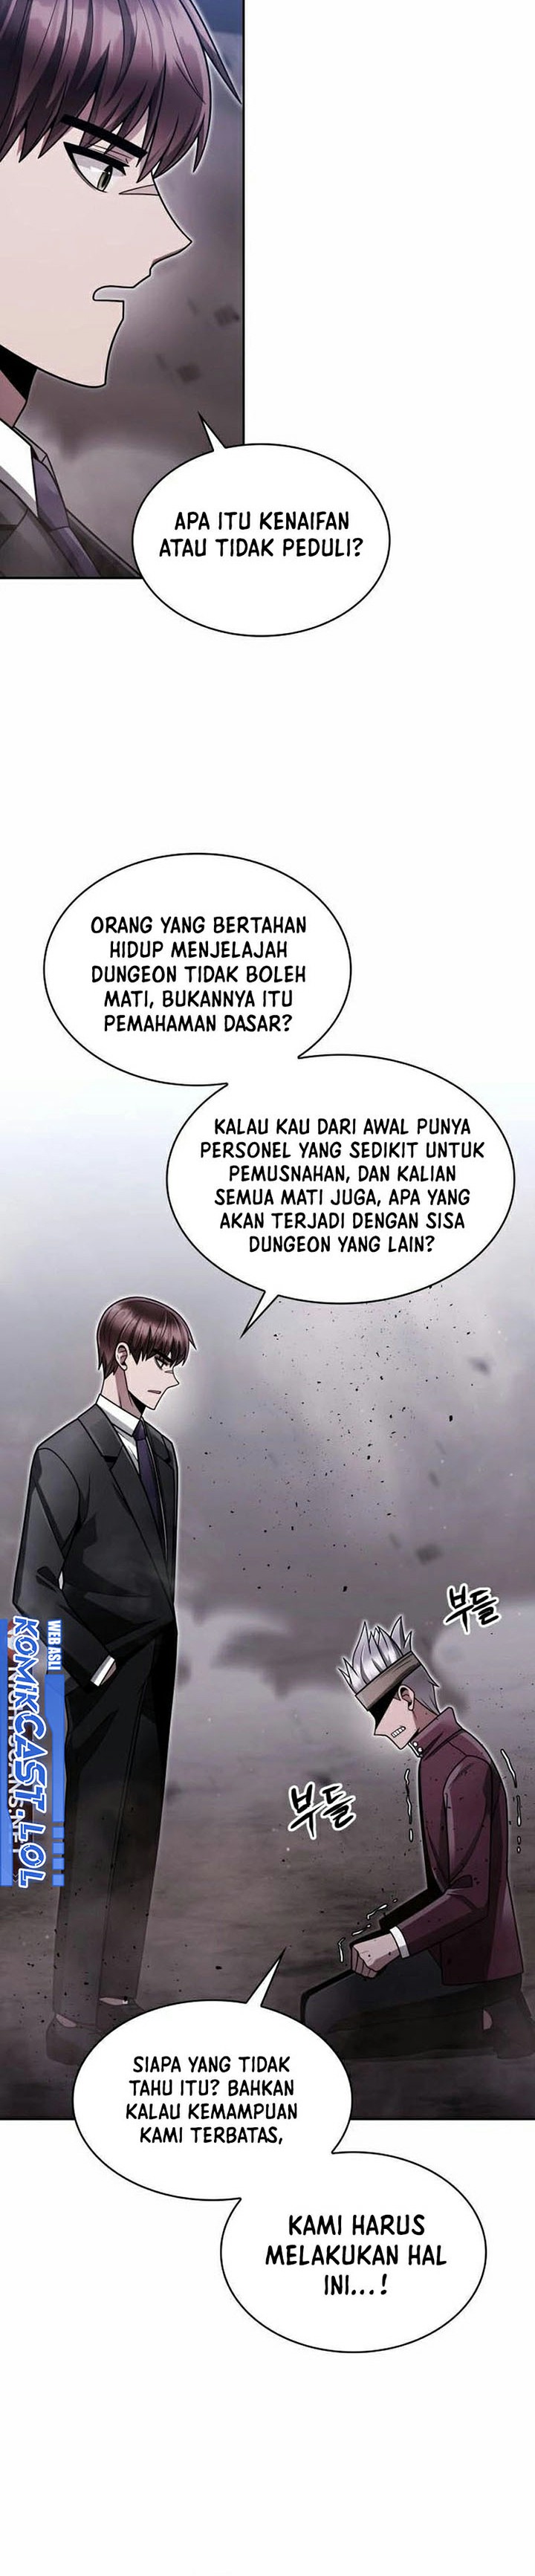 Dilarang COPAS - situs resmi www.mangacanblog.com - Komik clever cleaning life of the returned genius hunter 060 - chapter 60 61 Indonesia clever cleaning life of the returned genius hunter 060 - chapter 60 Terbaru 22|Baca Manga Komik Indonesia|Mangacan